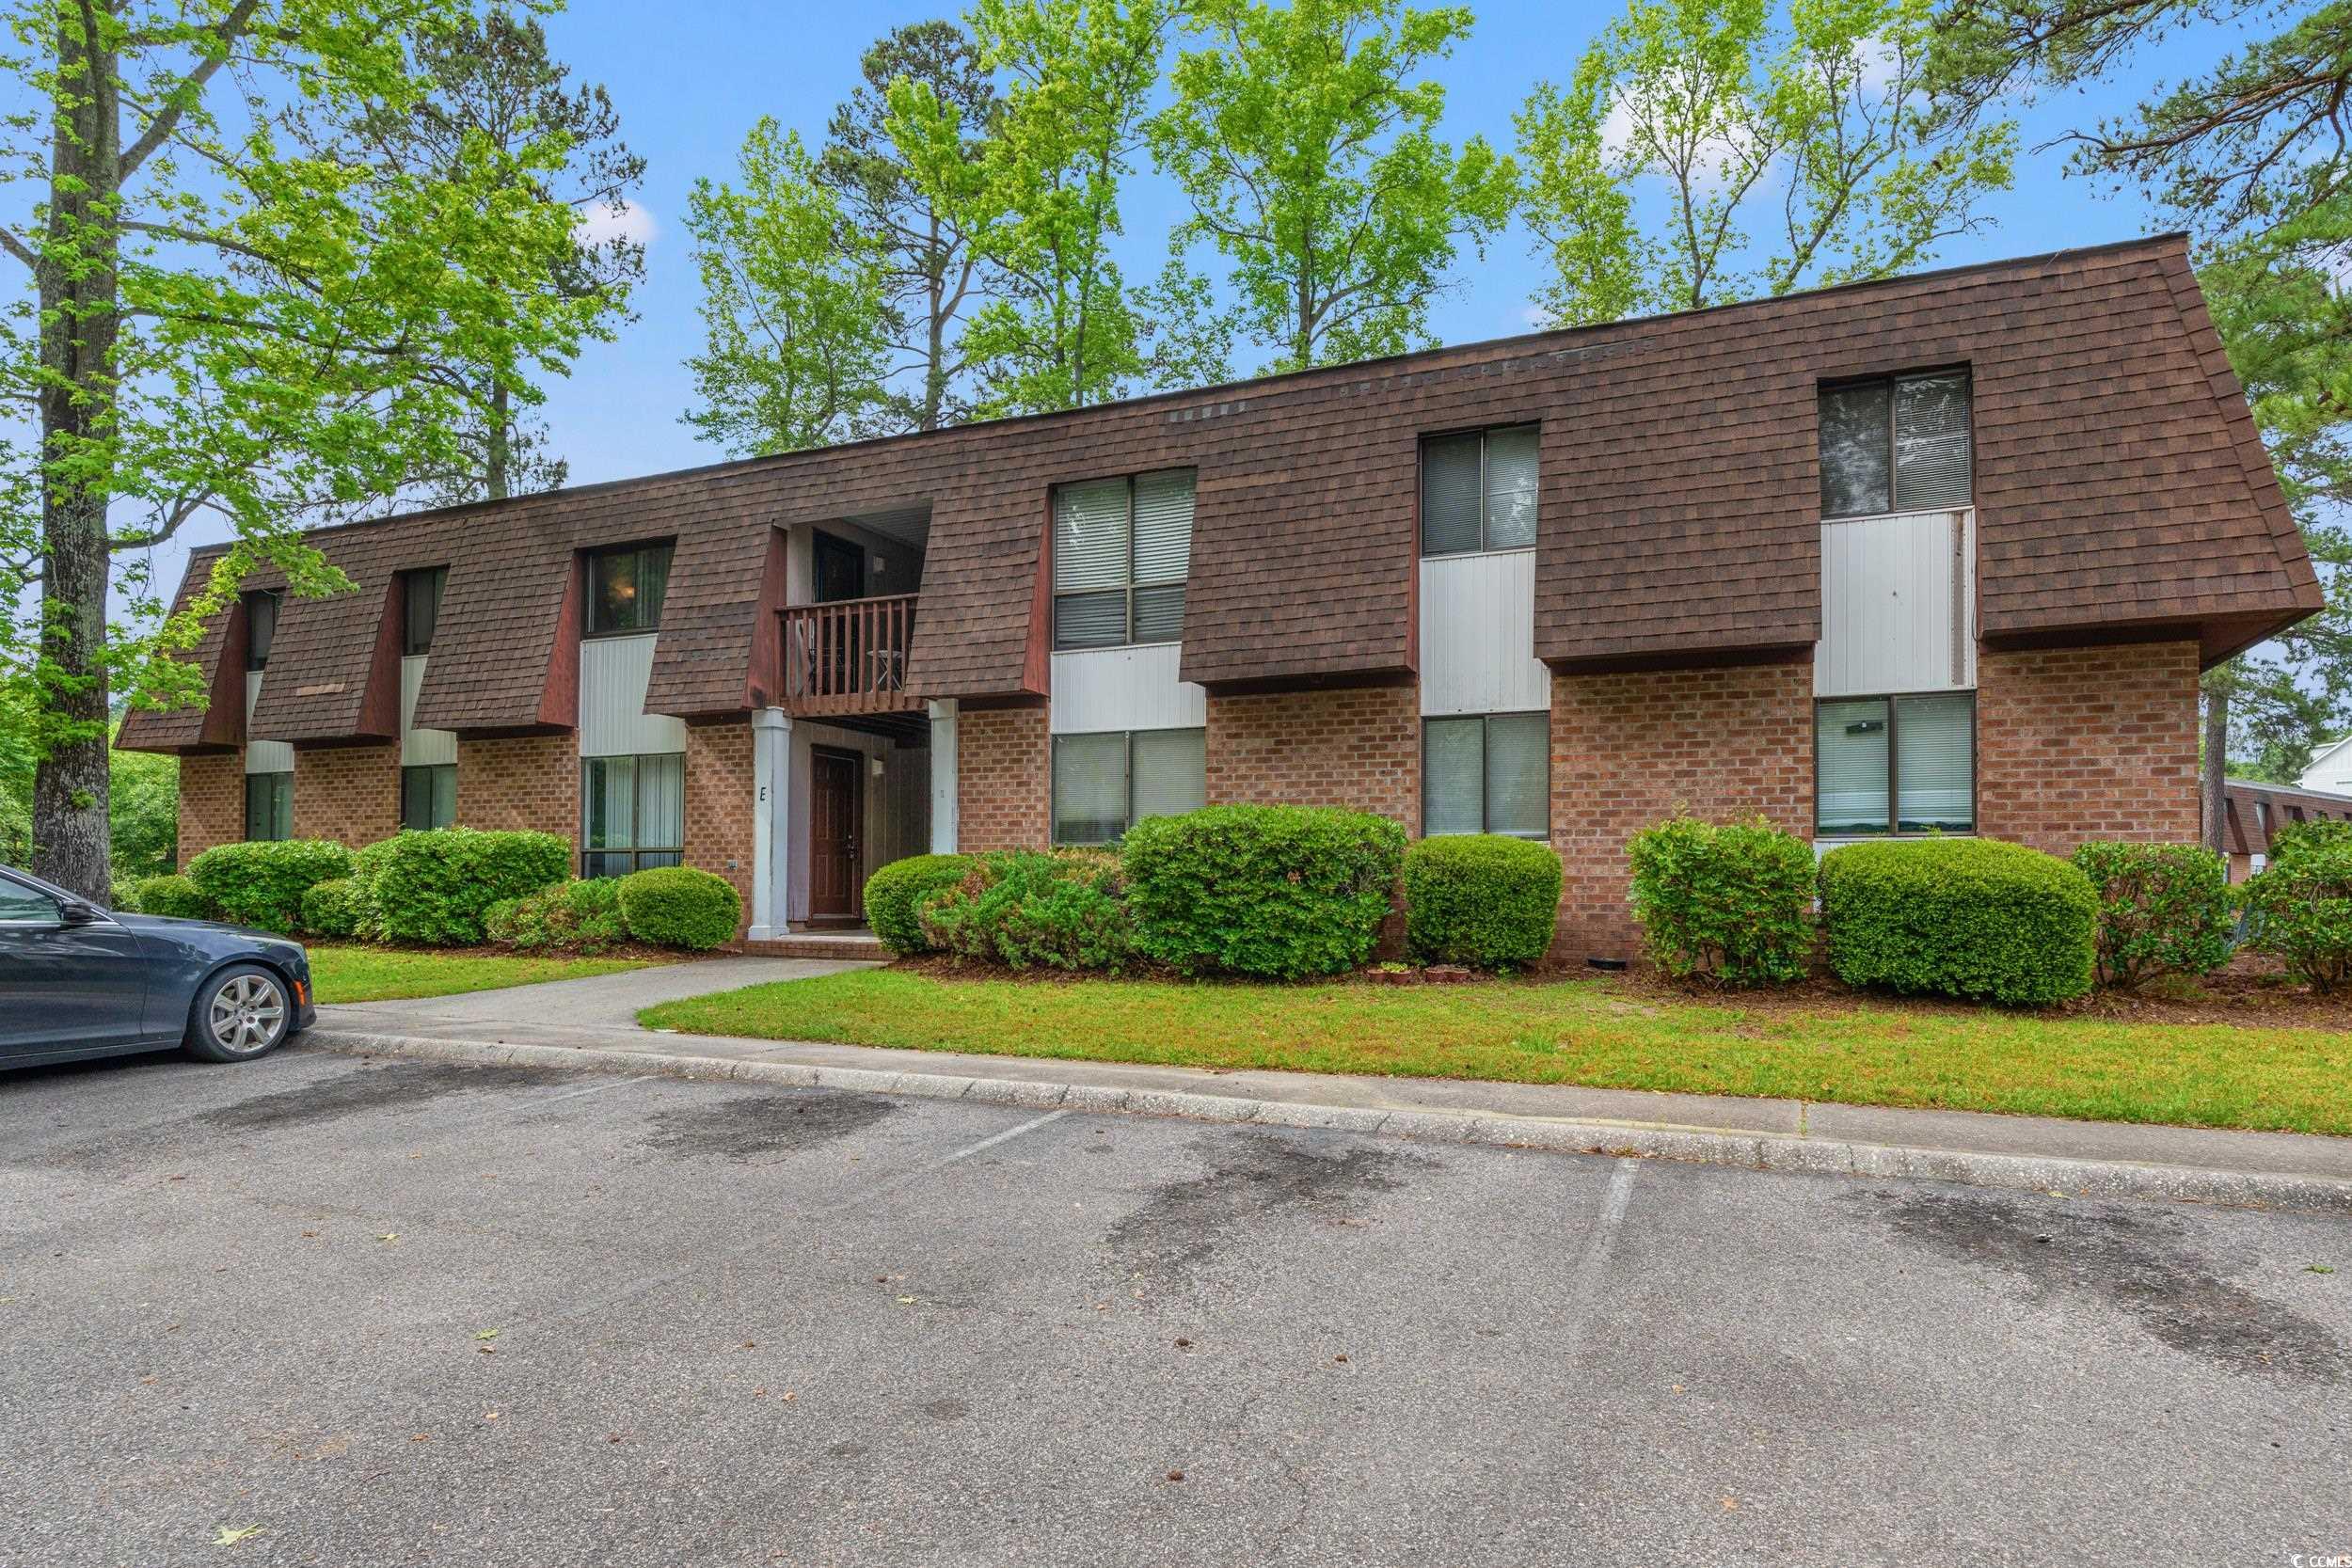 this updated second floor condo with 2 bedrooms and 1 bath is a perfect opportunity to live close to coastal carolina university. situated on a dead end street off of hwy 544 , this property is less than a quarter of a mile to coastal's football stadium and half a mile to the academic buildings. the unit has been updated with laminate flooring throughout and painted a popular gray. the kitchen features white cabinets and a white tile backsplash and all of the brand new appliances convey. there is a small laundry room with a stackable washer and dryer included. the main bedroom has a walk in closet. the bathroom has been updated with a tile backsplash and medicine cabinet. hoa includes building insurance, water/sewer, trash pick up, and pest control. this is the affordable move in ready option you've been looking for or a great investment property close to conway medical center and coastal carolina university. *some images have been virtually staged.